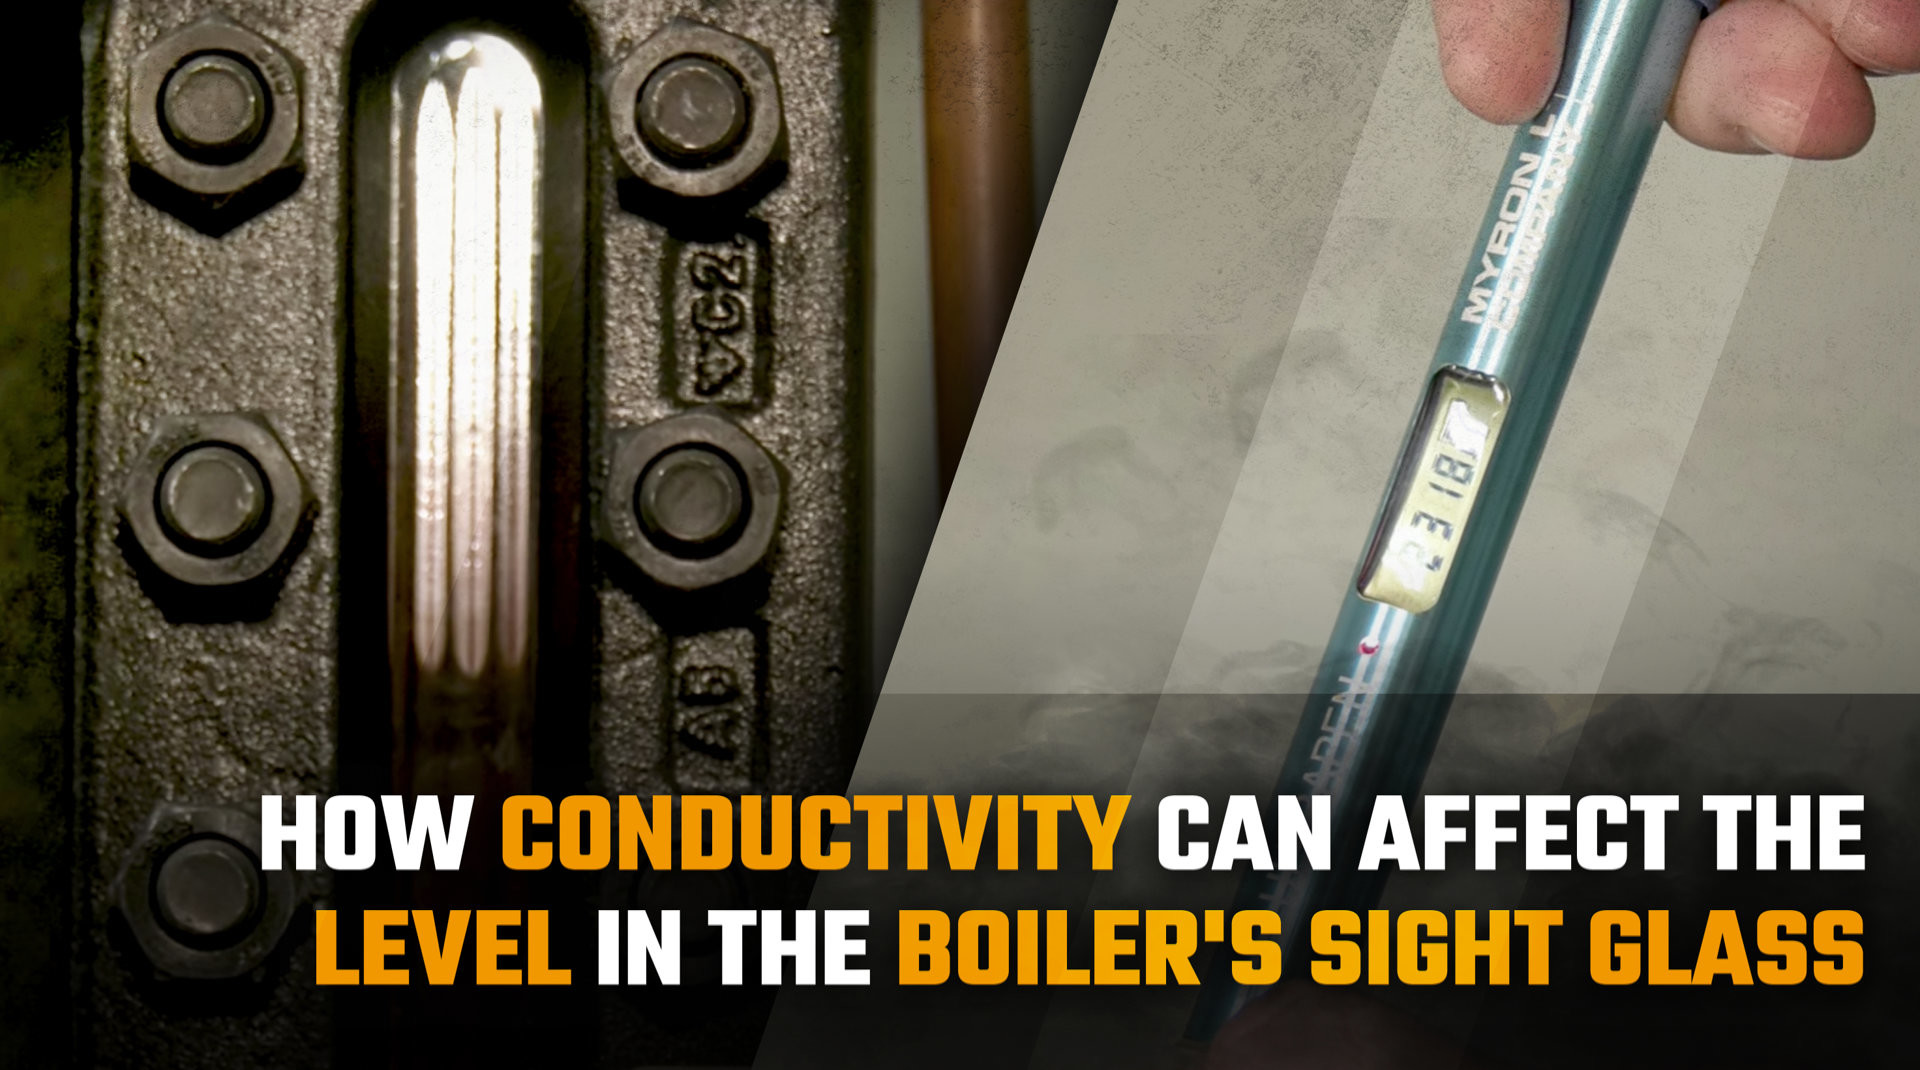 How Conductivity Can Affect the Level in the Boiler's Sight Glass